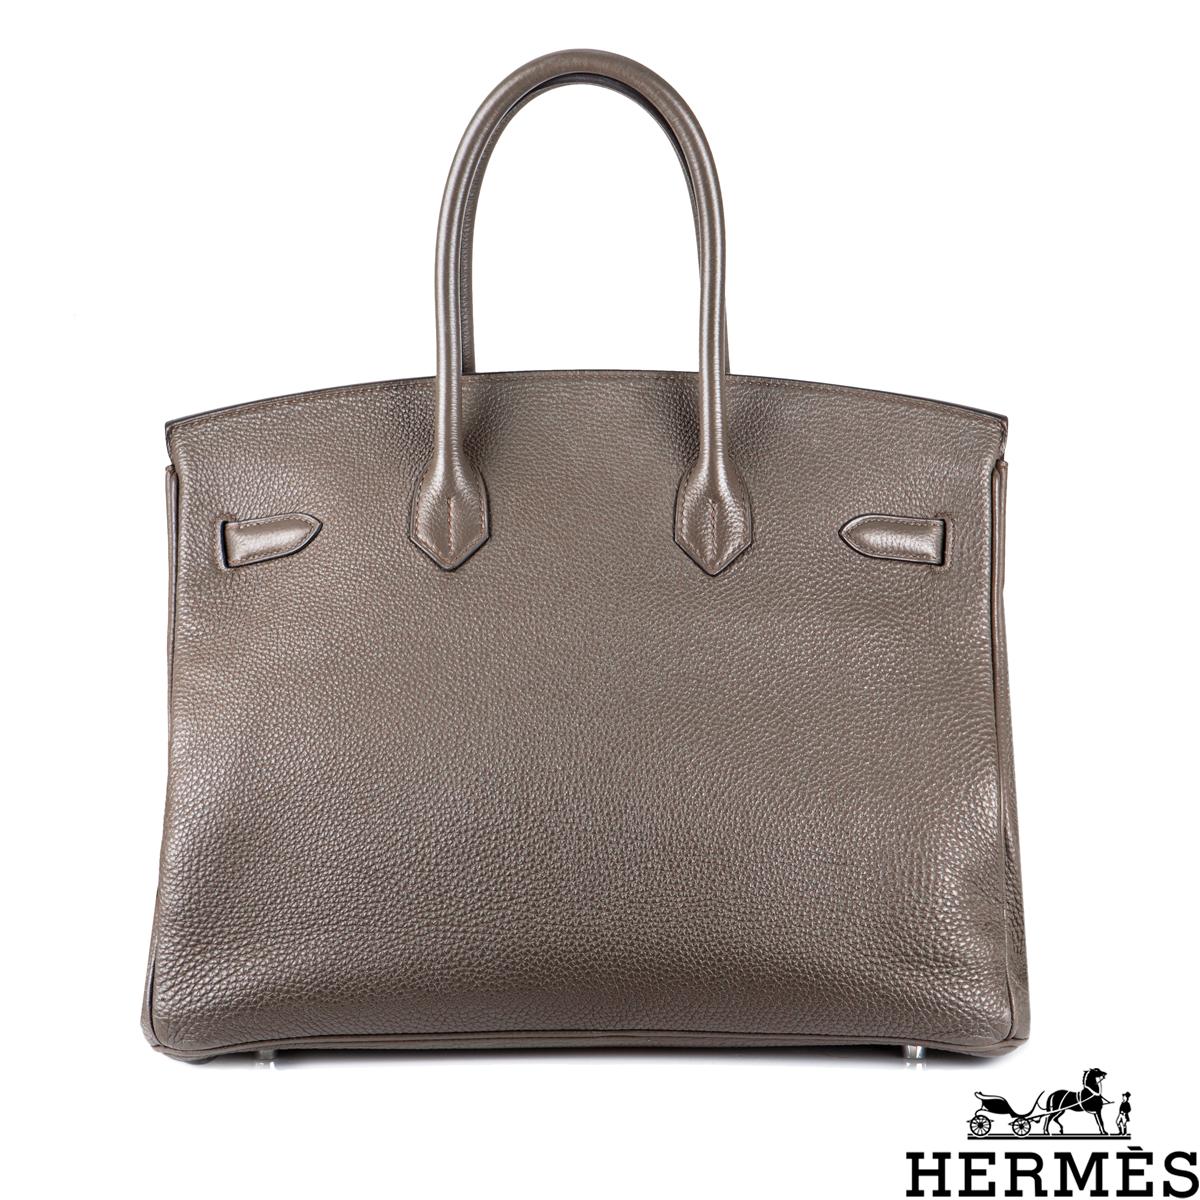 A classic Hermès 35cm Birkin bag. The exterior of this Birkin is in Etoupe Togo leather with tonal stitching. It features palladium hardware and two top handles with a front toggle closure. The interior features a zipper pocket with an Hermès